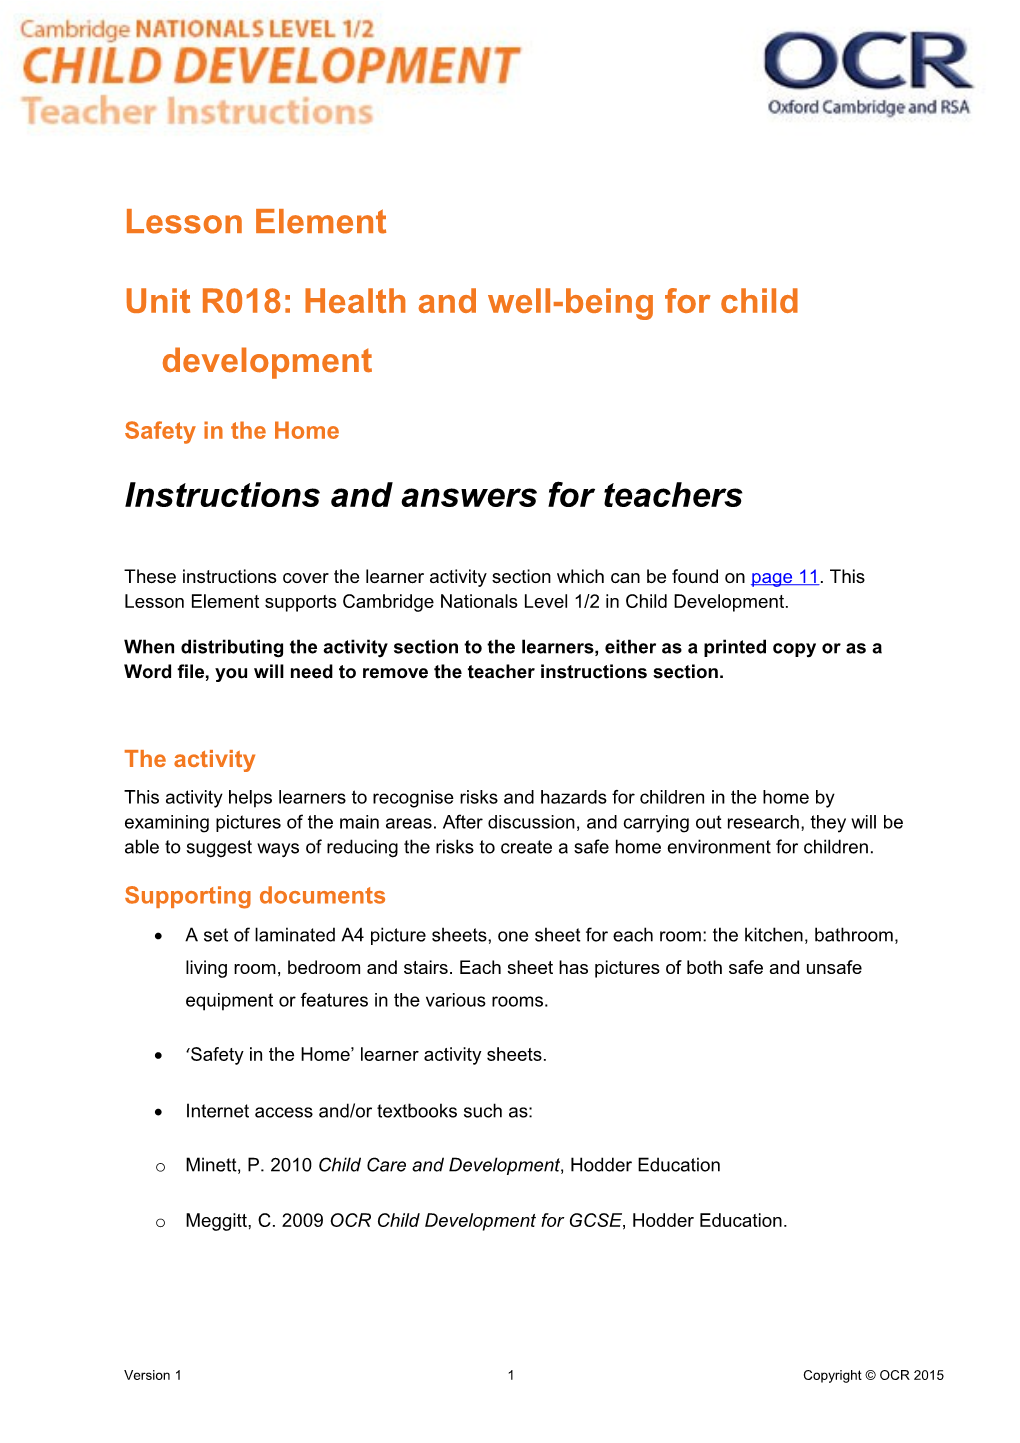 Cambridge Nationals Child Development Unit R018: Health and Well-Being for Child Development